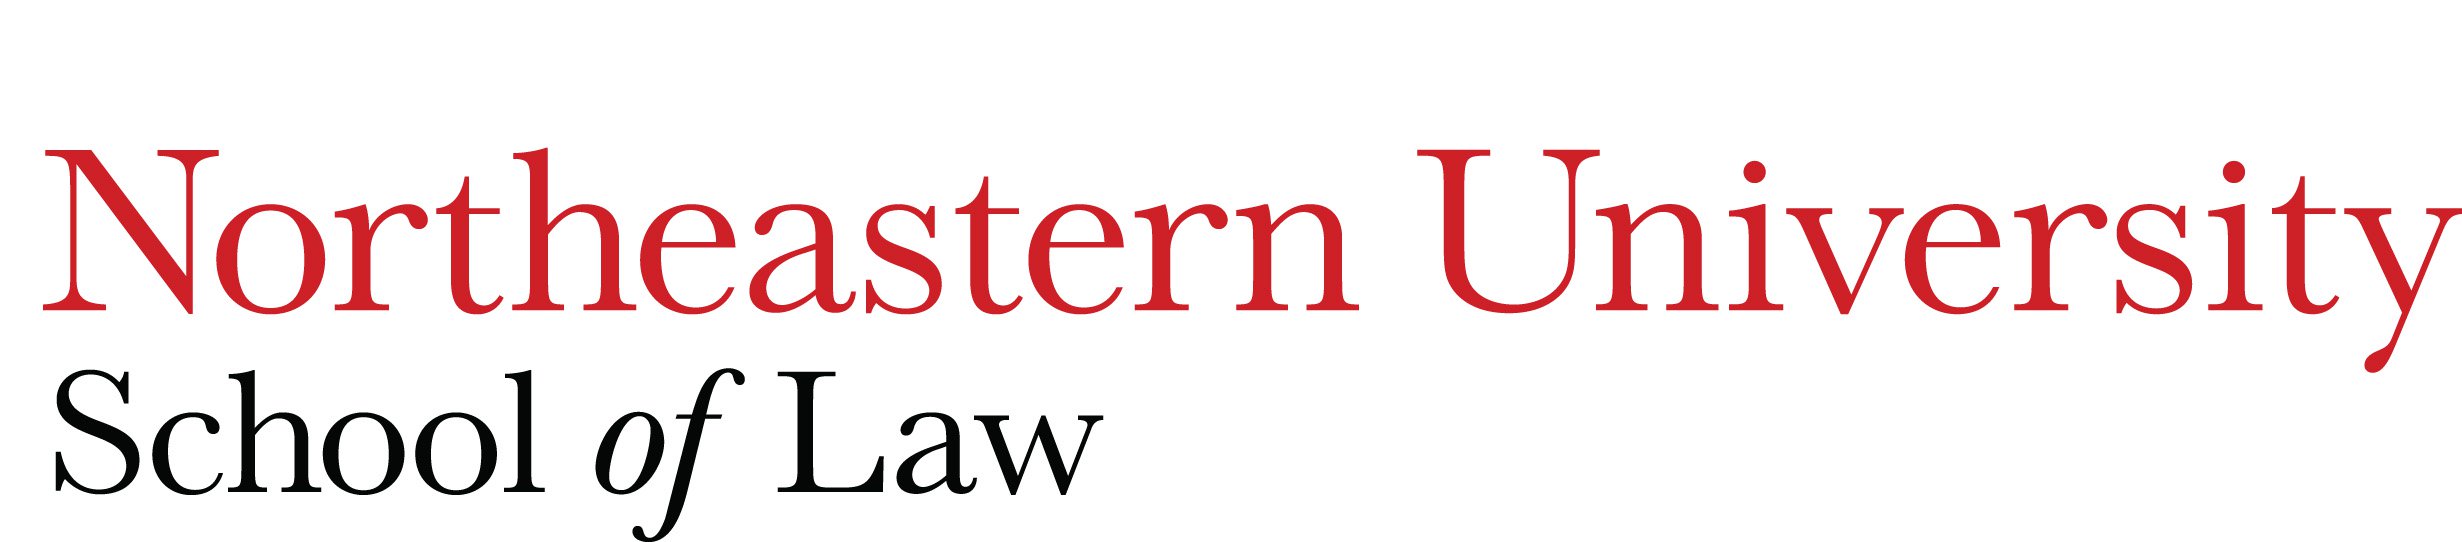 Northeastern University School of Law | Above the Law